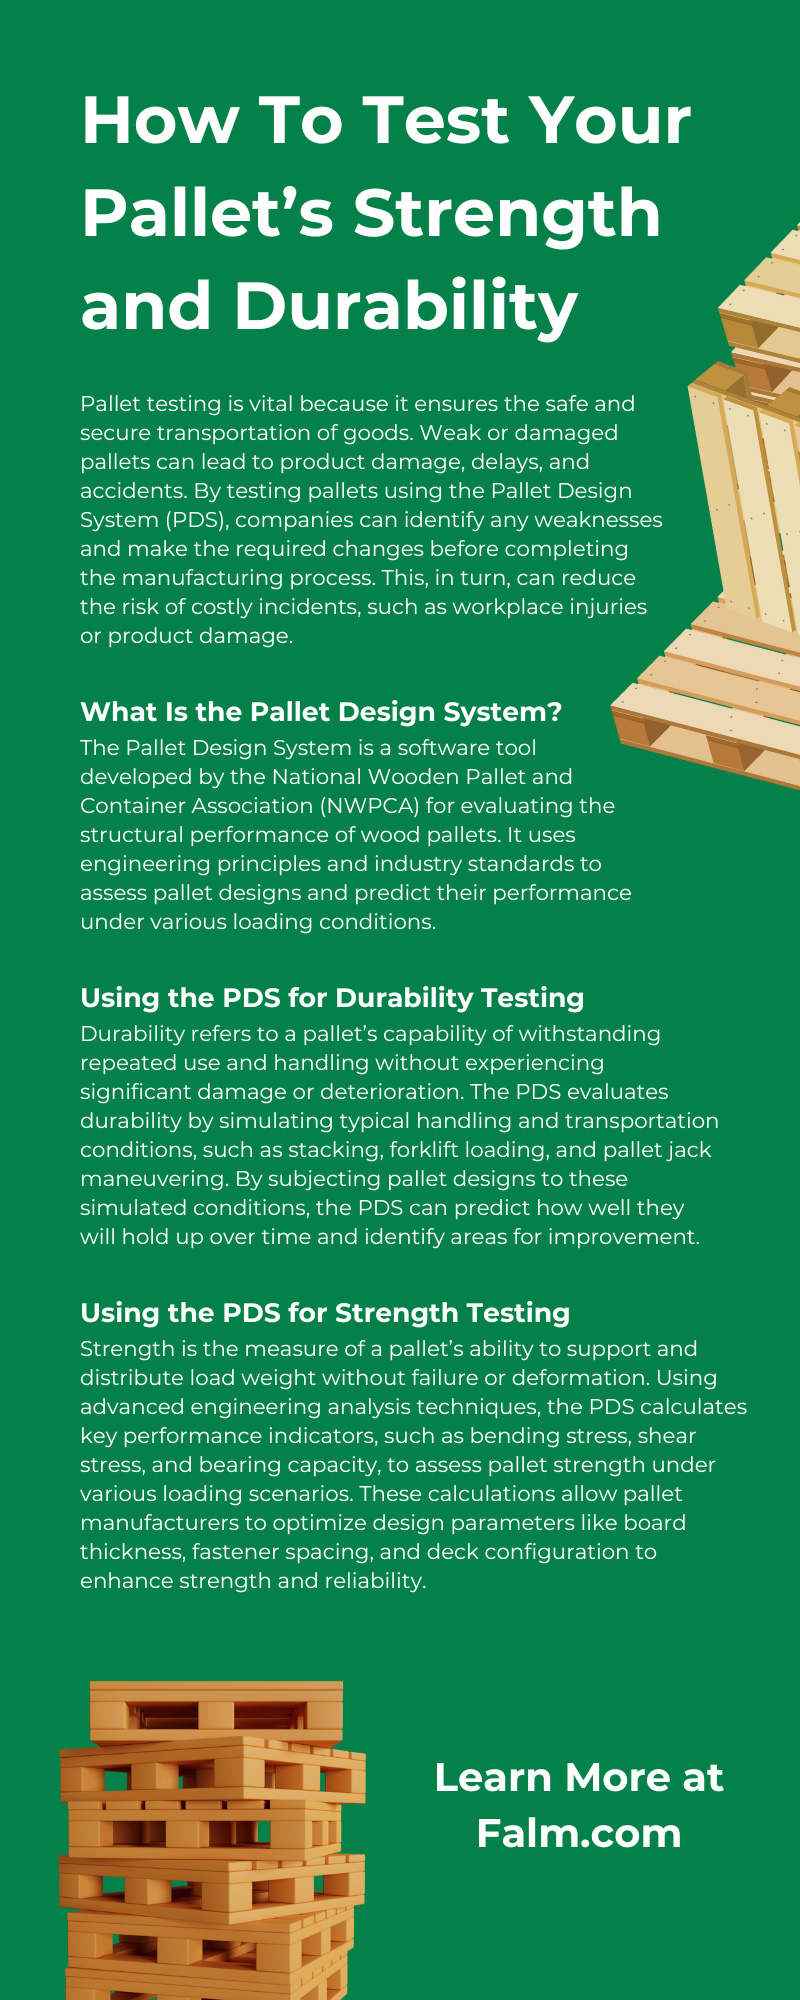 How To Test Your Pallet’s Strength and Durability
